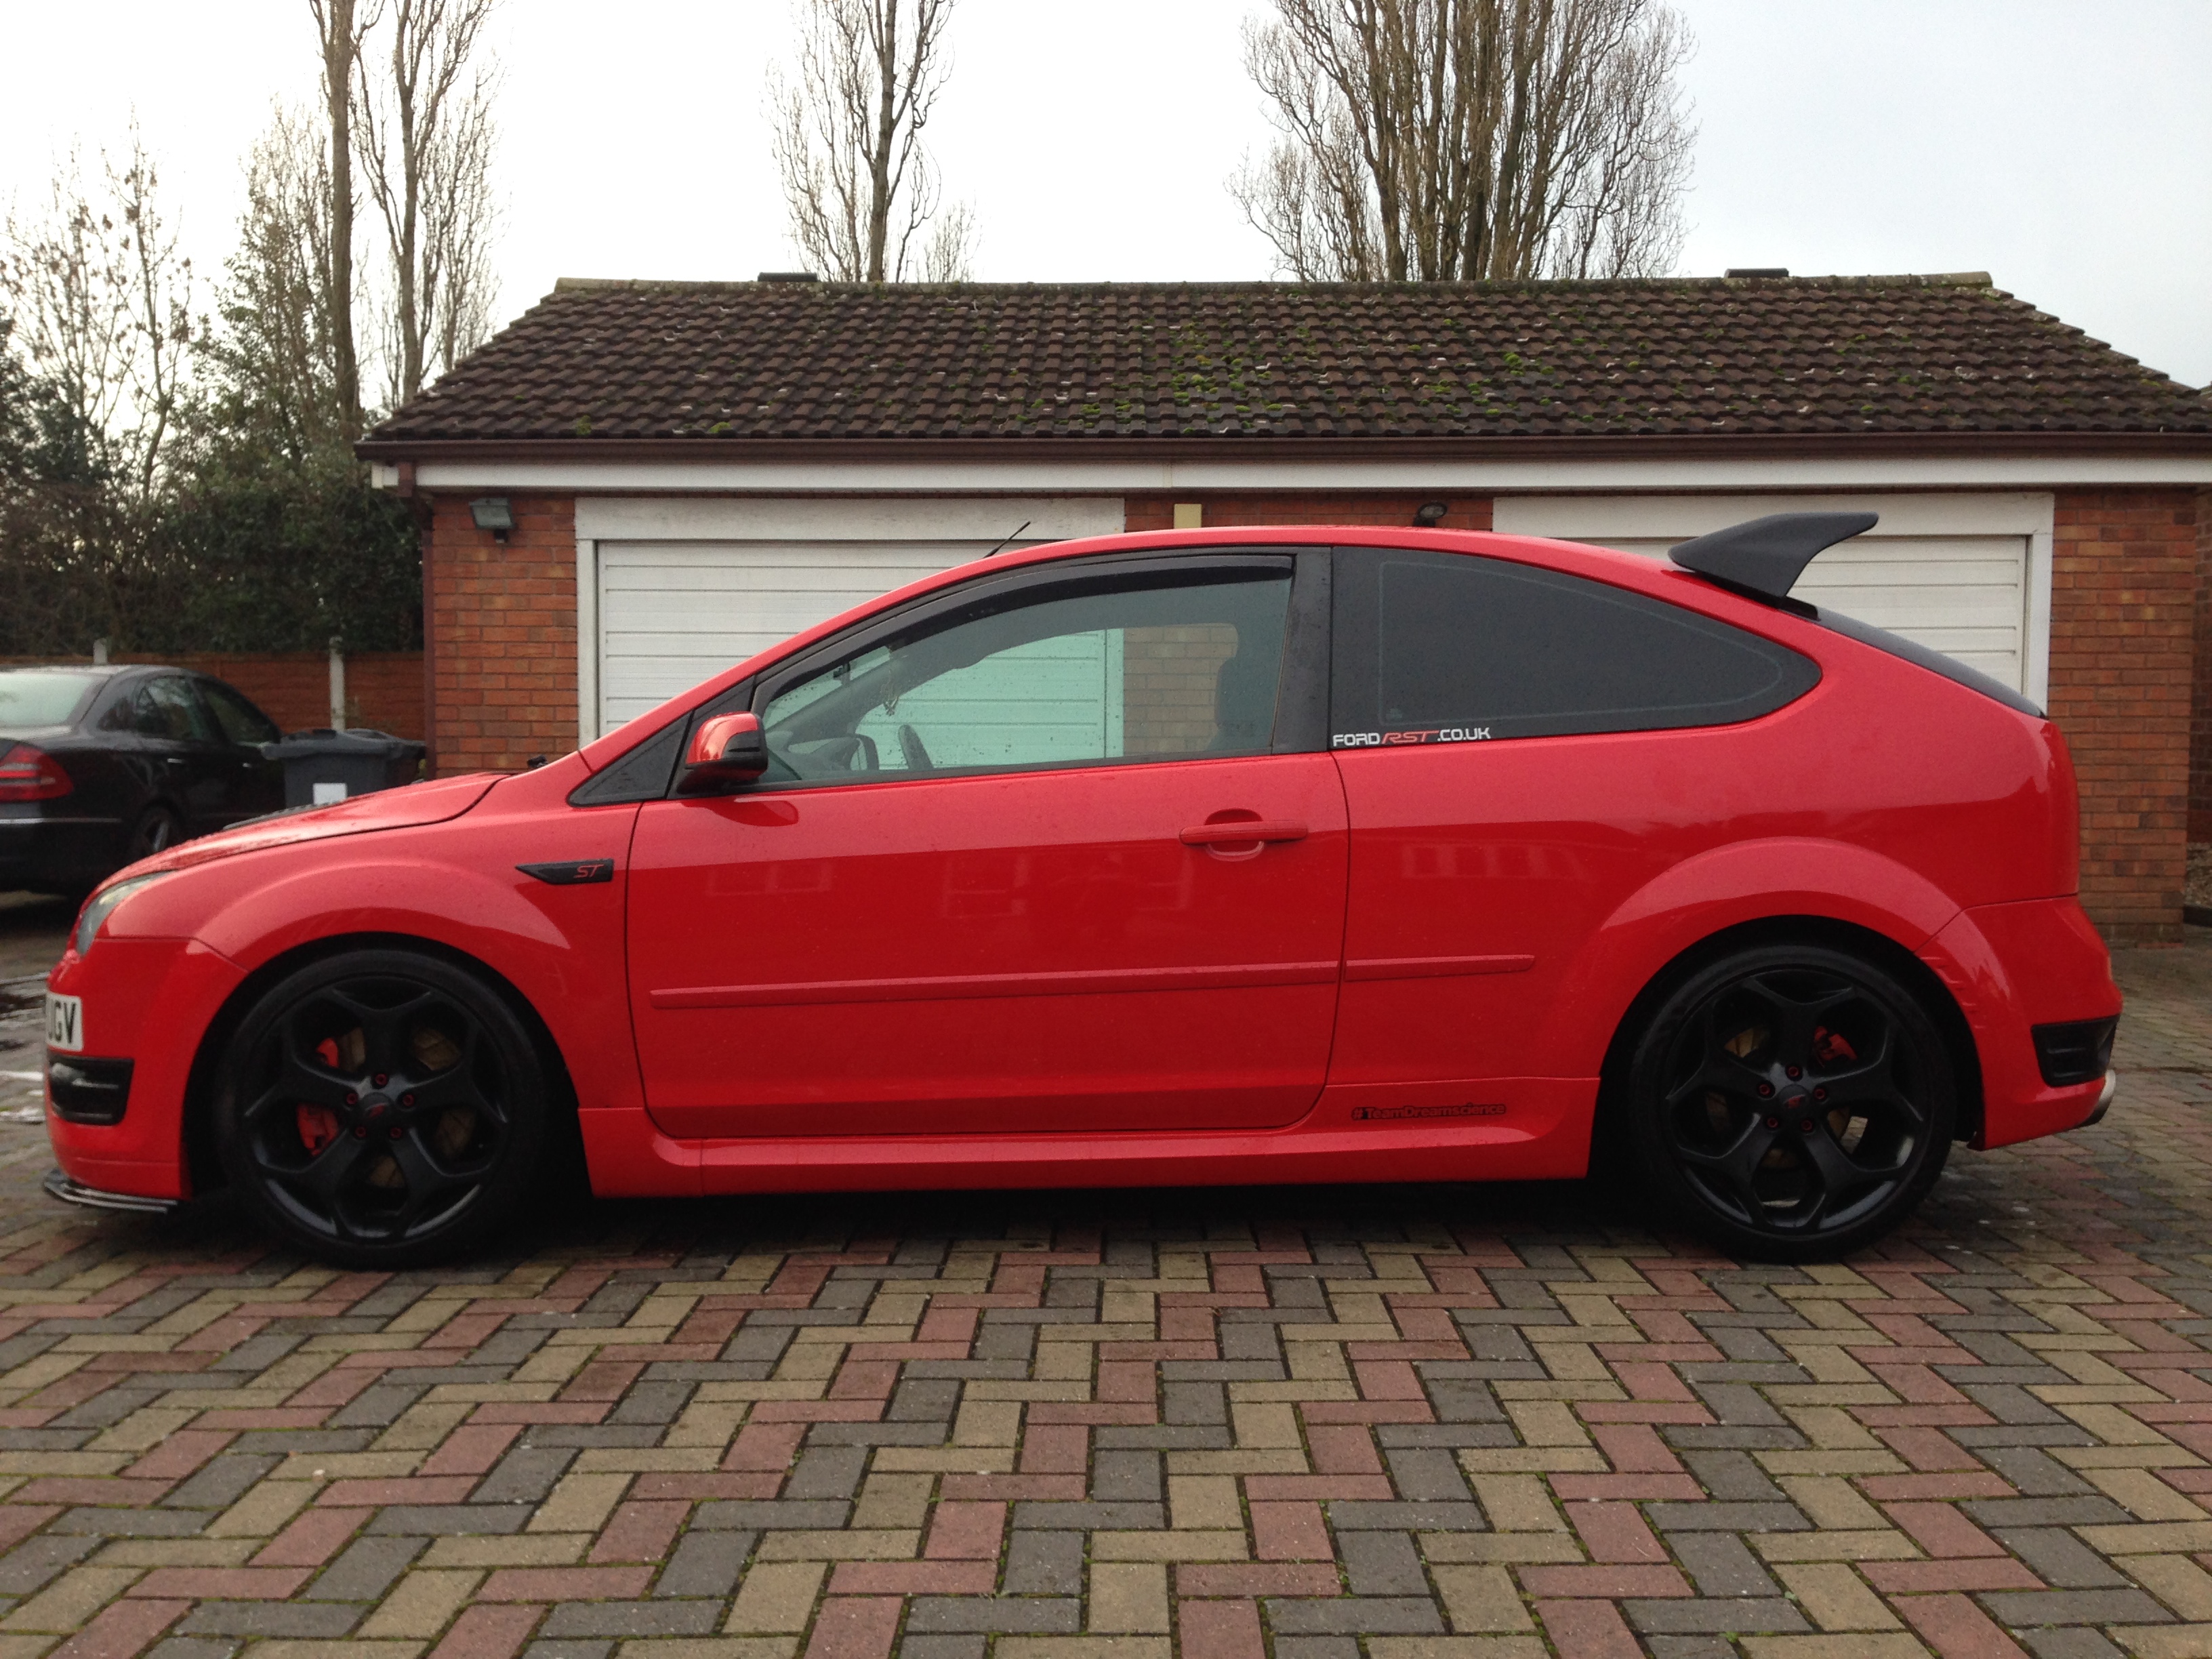 Ford focus st2 dreamscience for sale £6995  PassionFord  Ford Focus, Escort  RS Forum Discussion